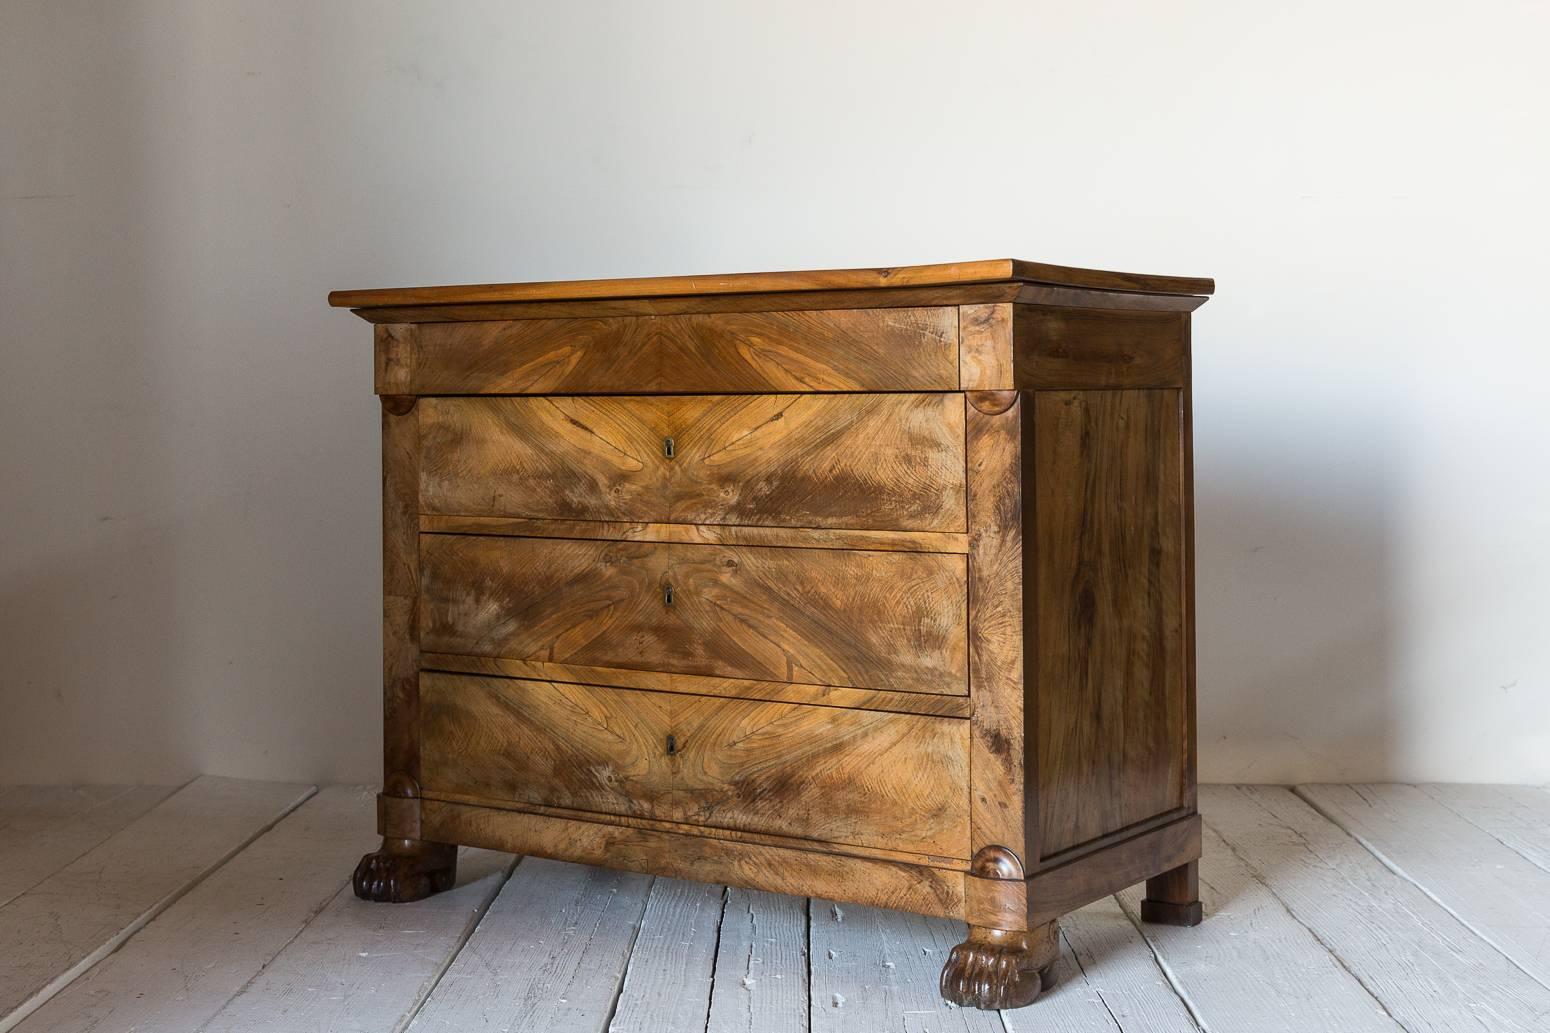 Early 20th Century French Three-Drawer Dresser with Beautiful Wood Details and Claw Feet